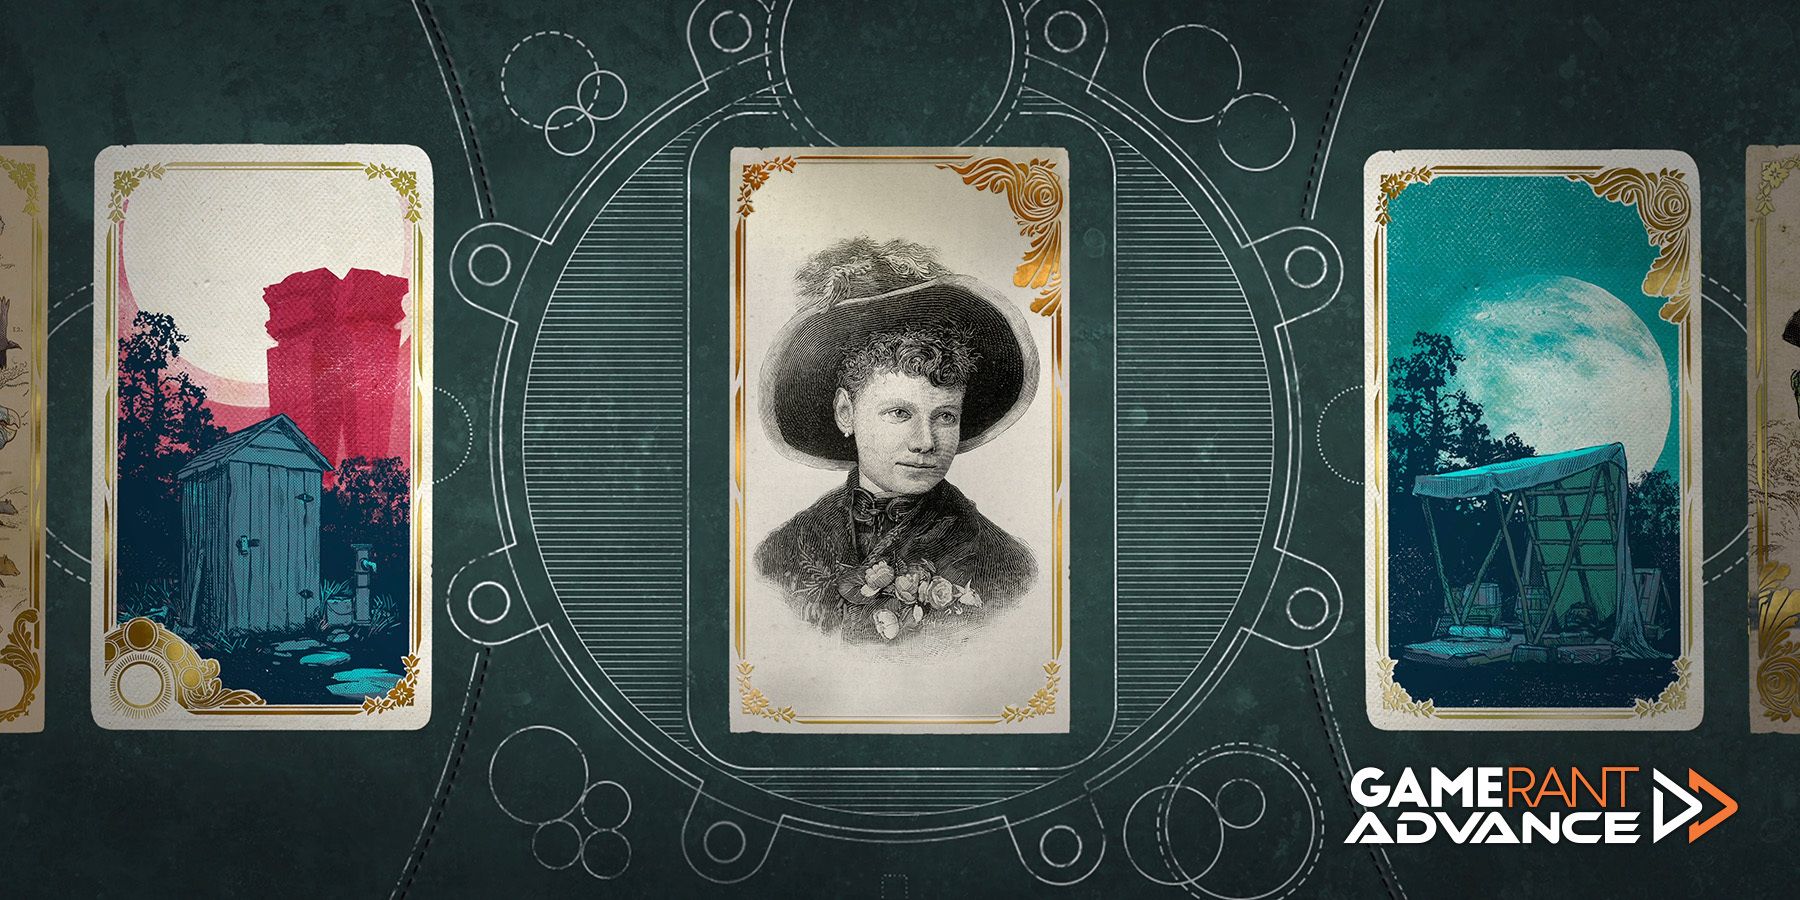 Nightingale: Who is Nellie Bly?